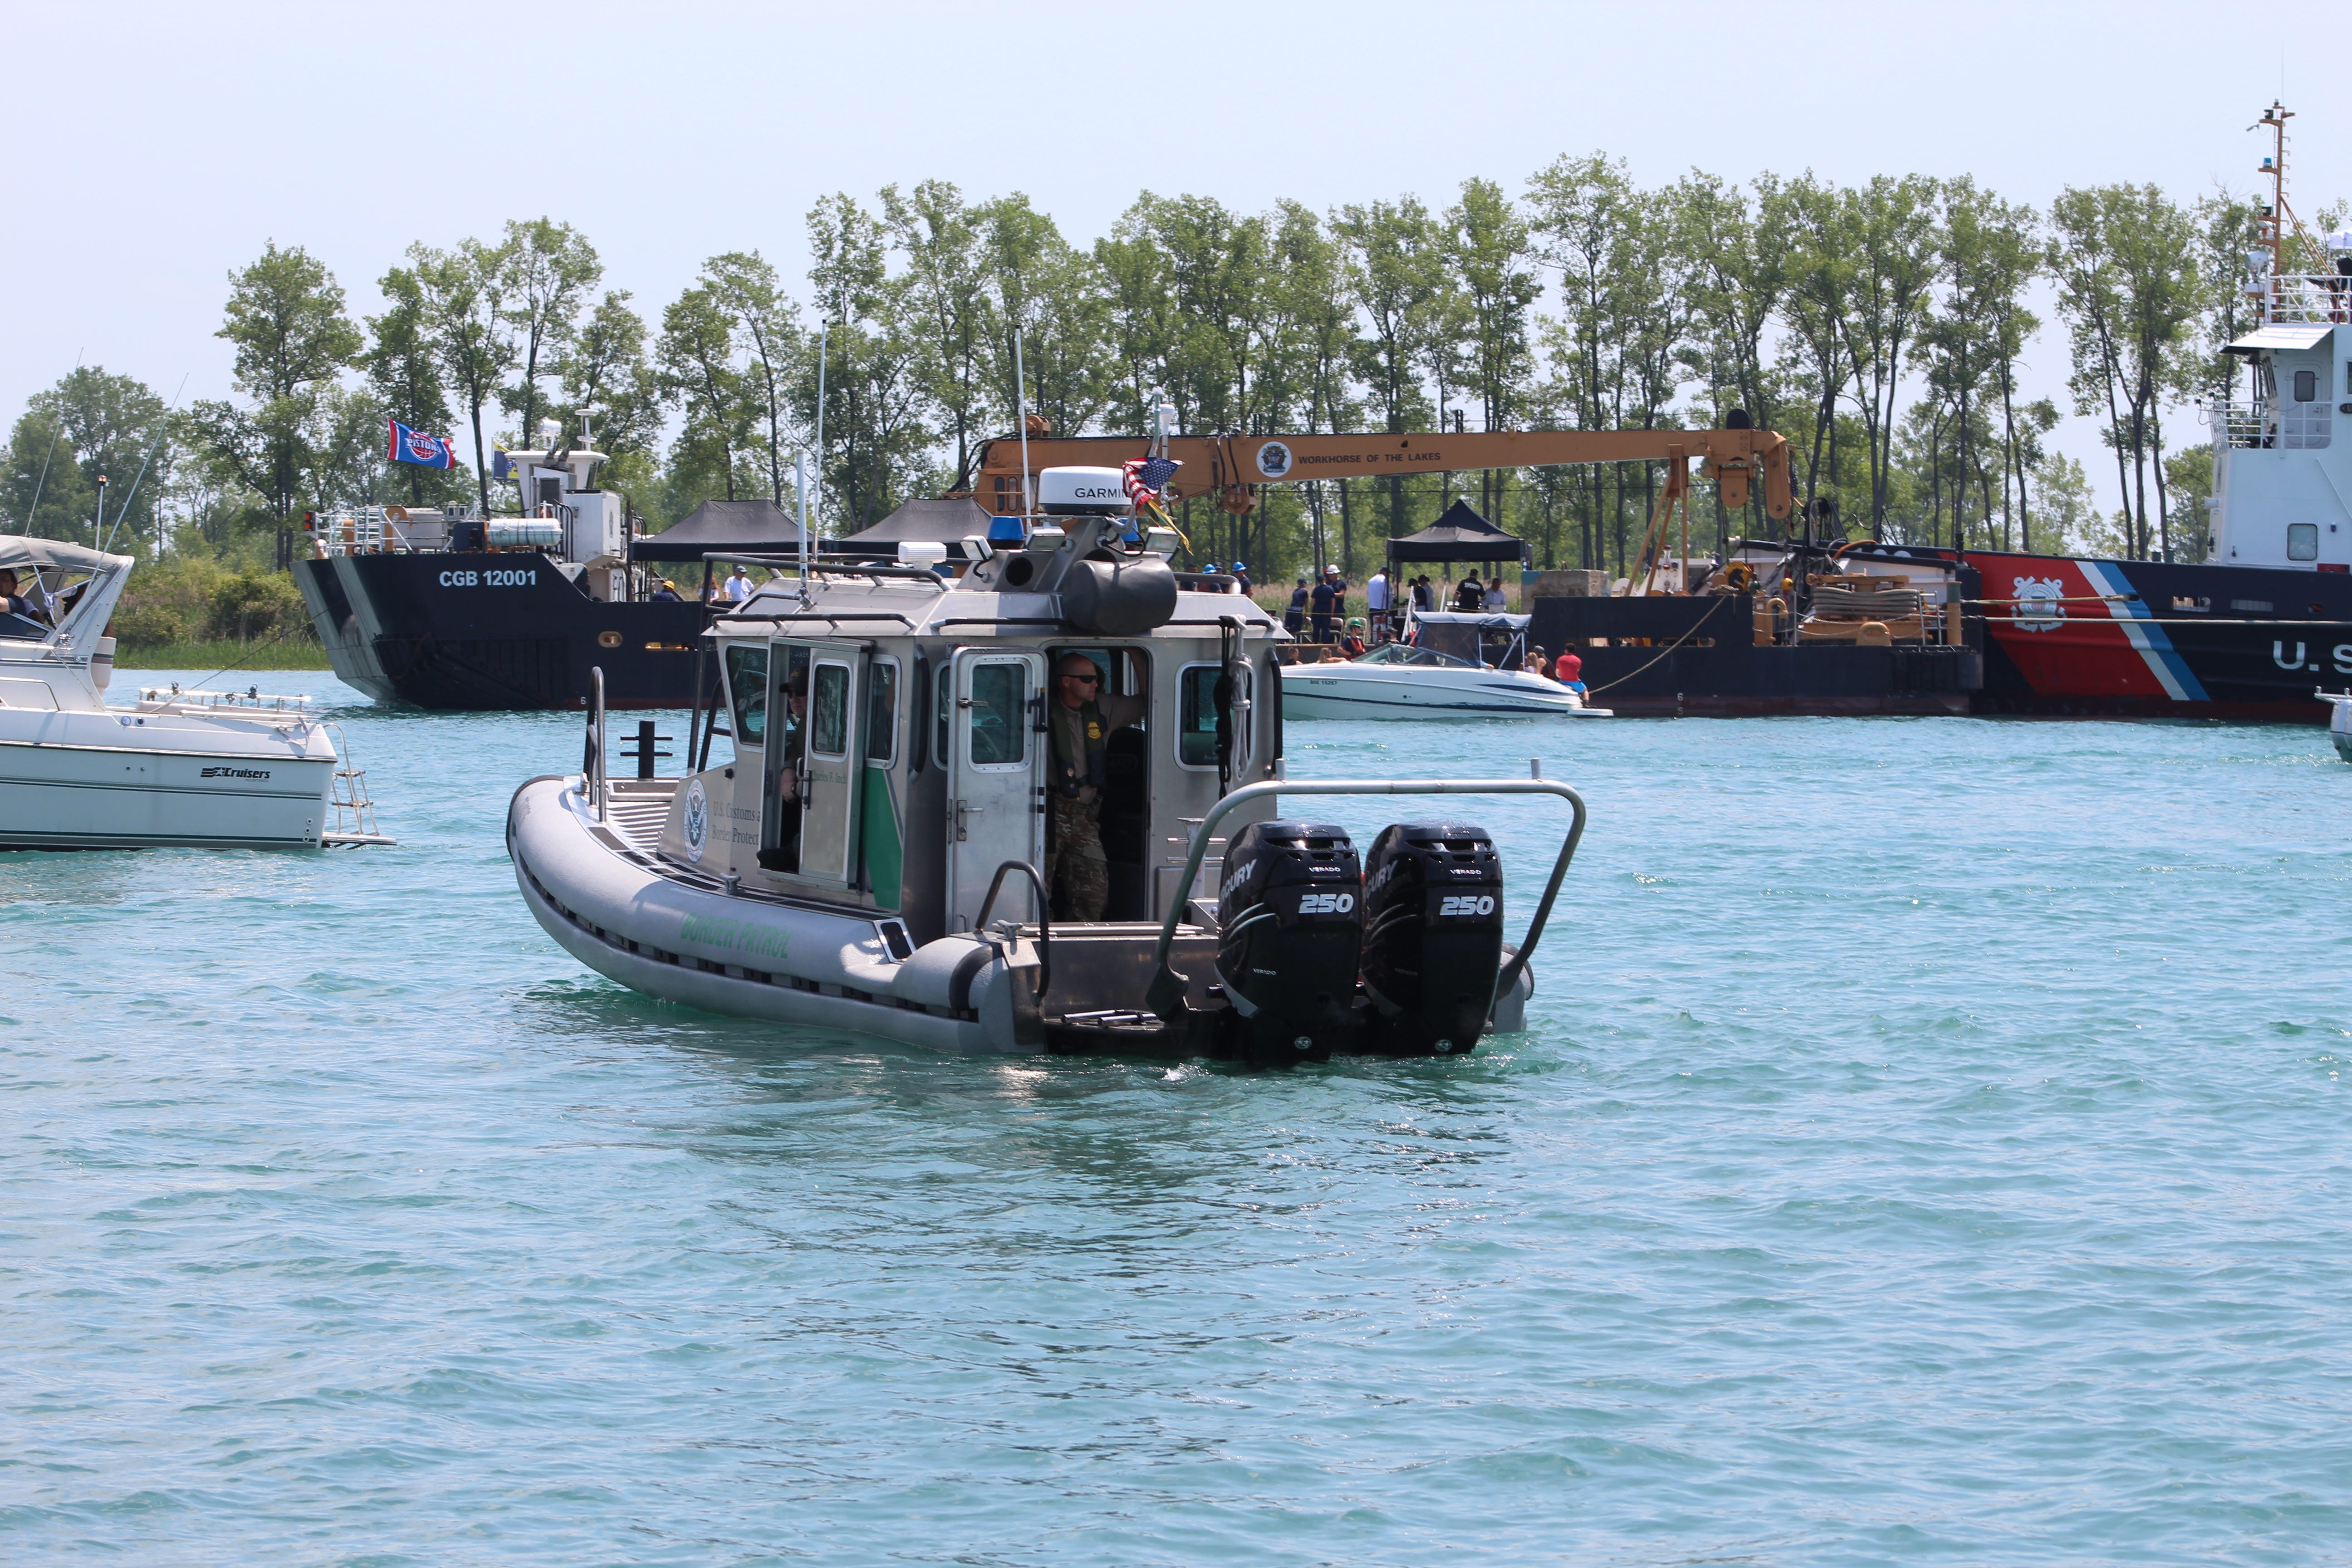 A U.S. Customs and Border Patrol boat patrols the waters around Gull Island during Jobbie Nooner on Lake St. Clair, Friday, June 28, 2019.